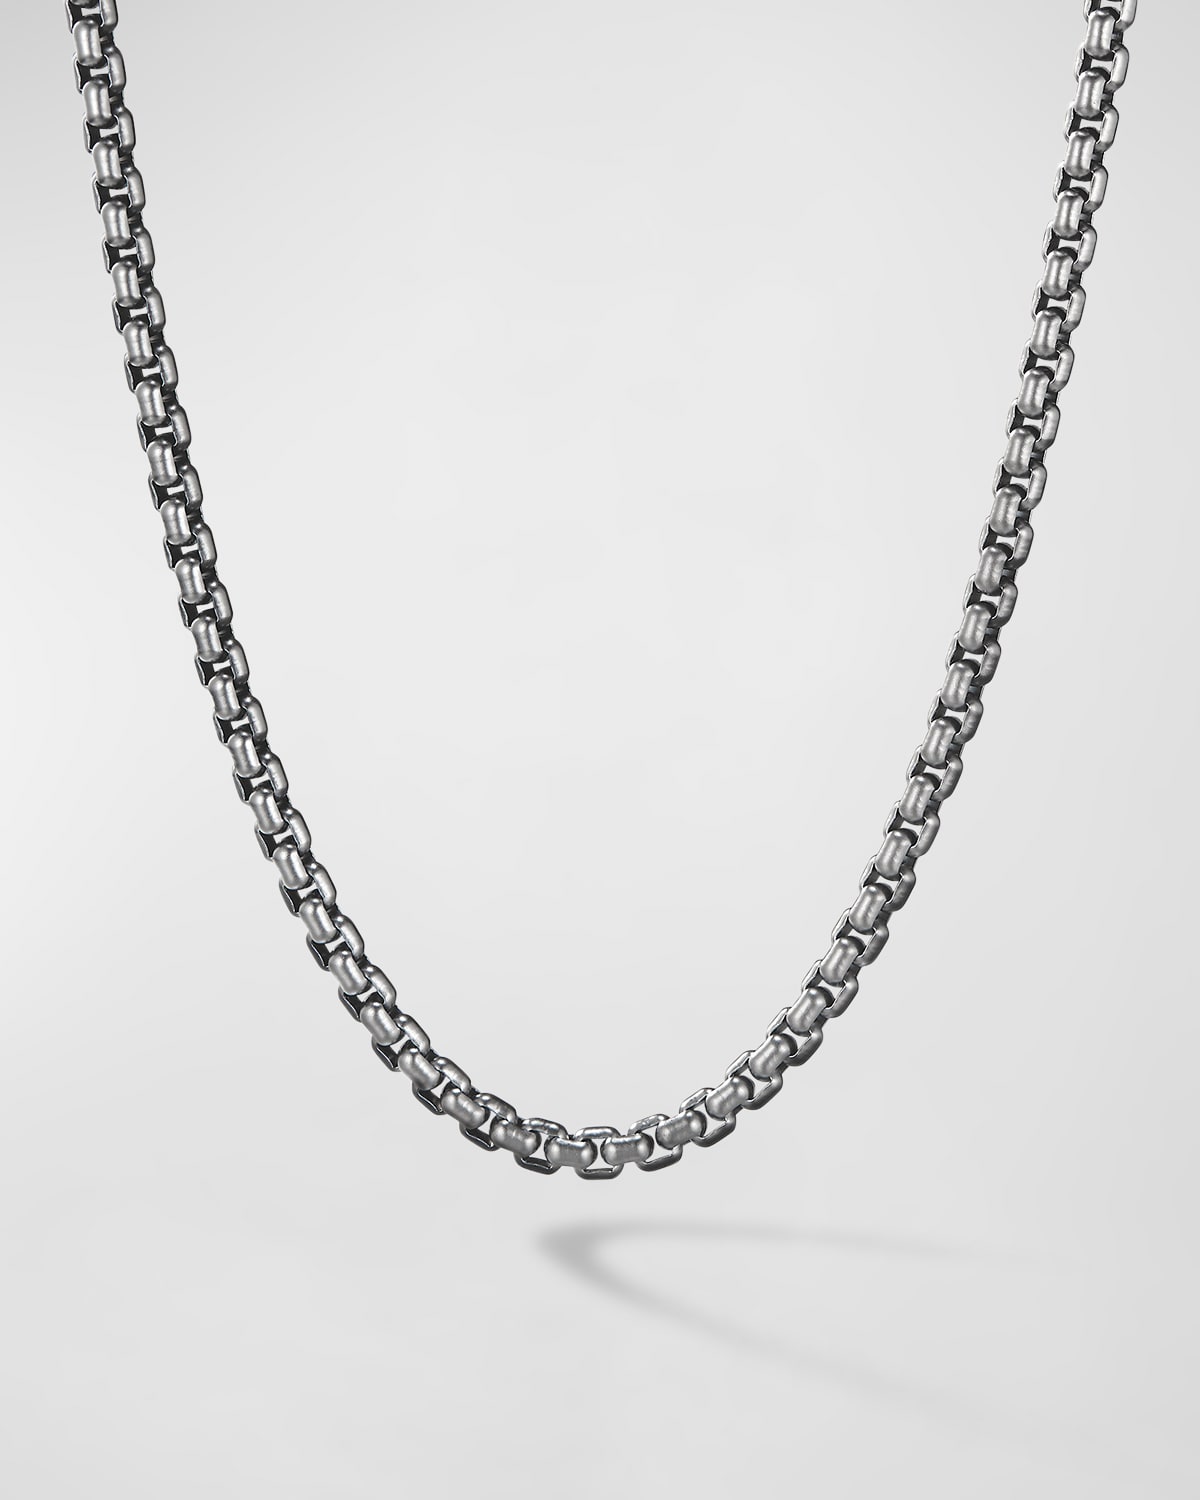 Men's Box Chain Necklace in Darkened Stainless Steel, 4mm, 26"L